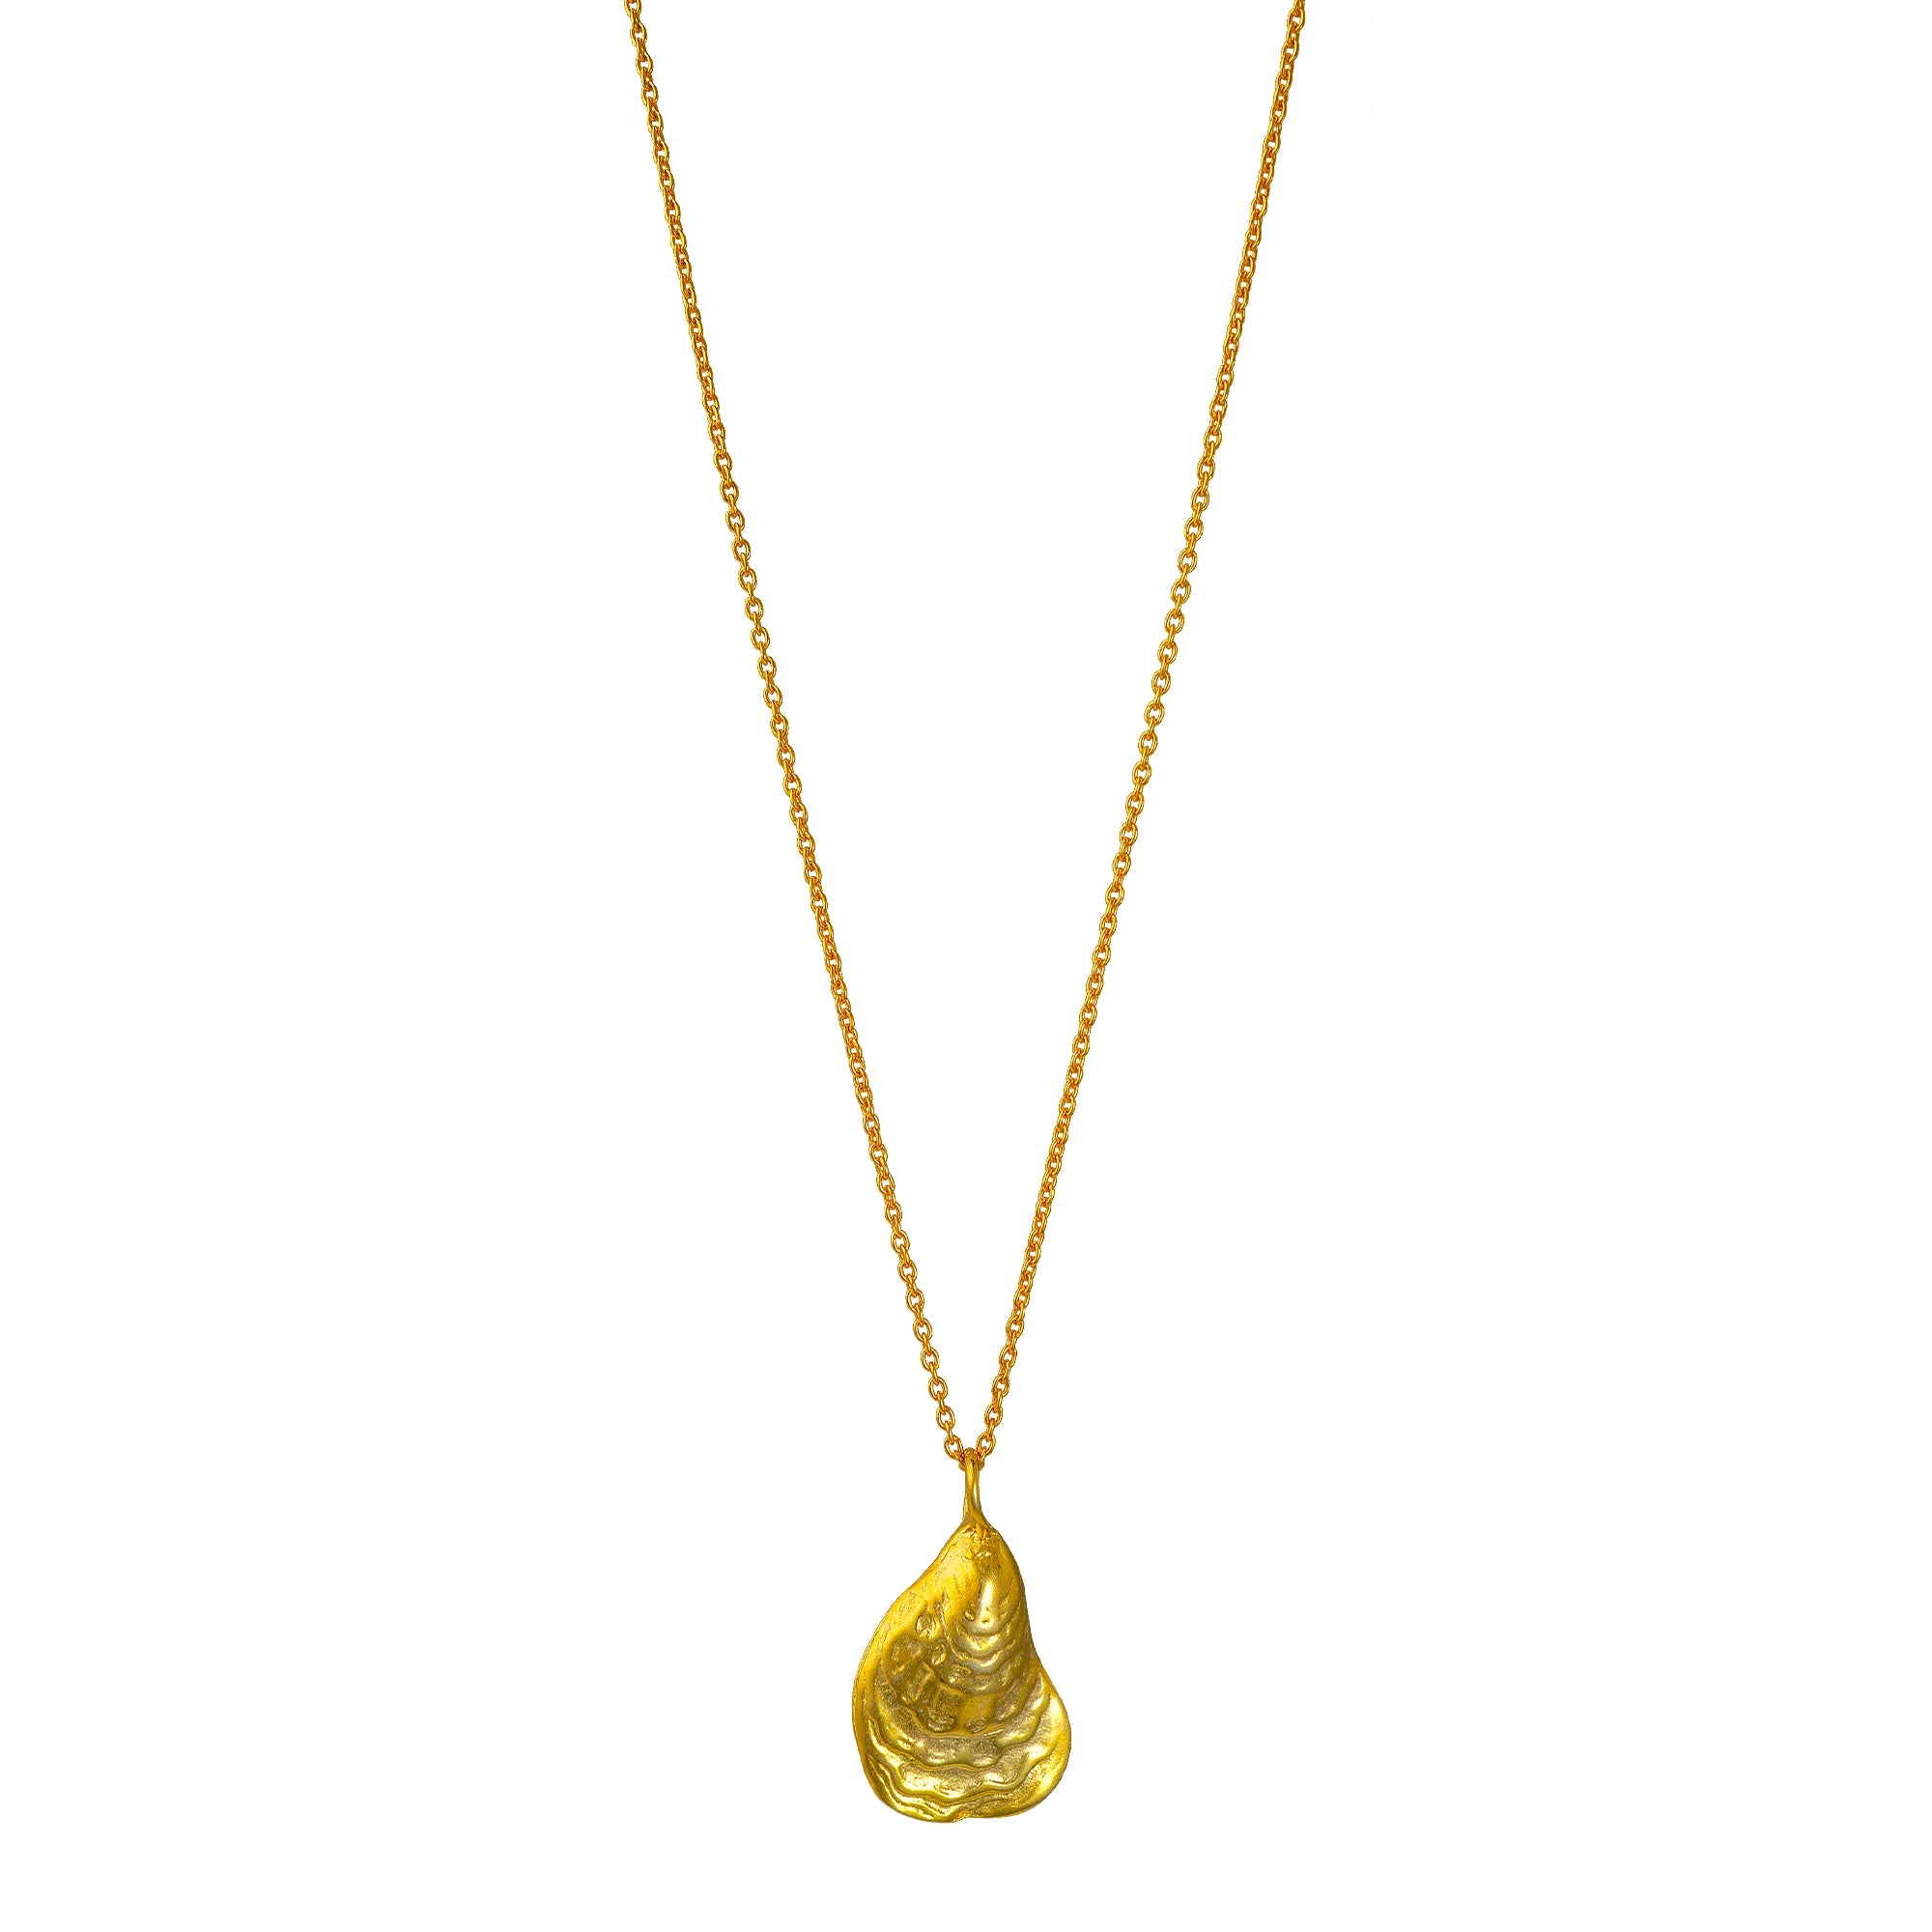 Oyster Shell Pendant Necklace - Gold, Silver